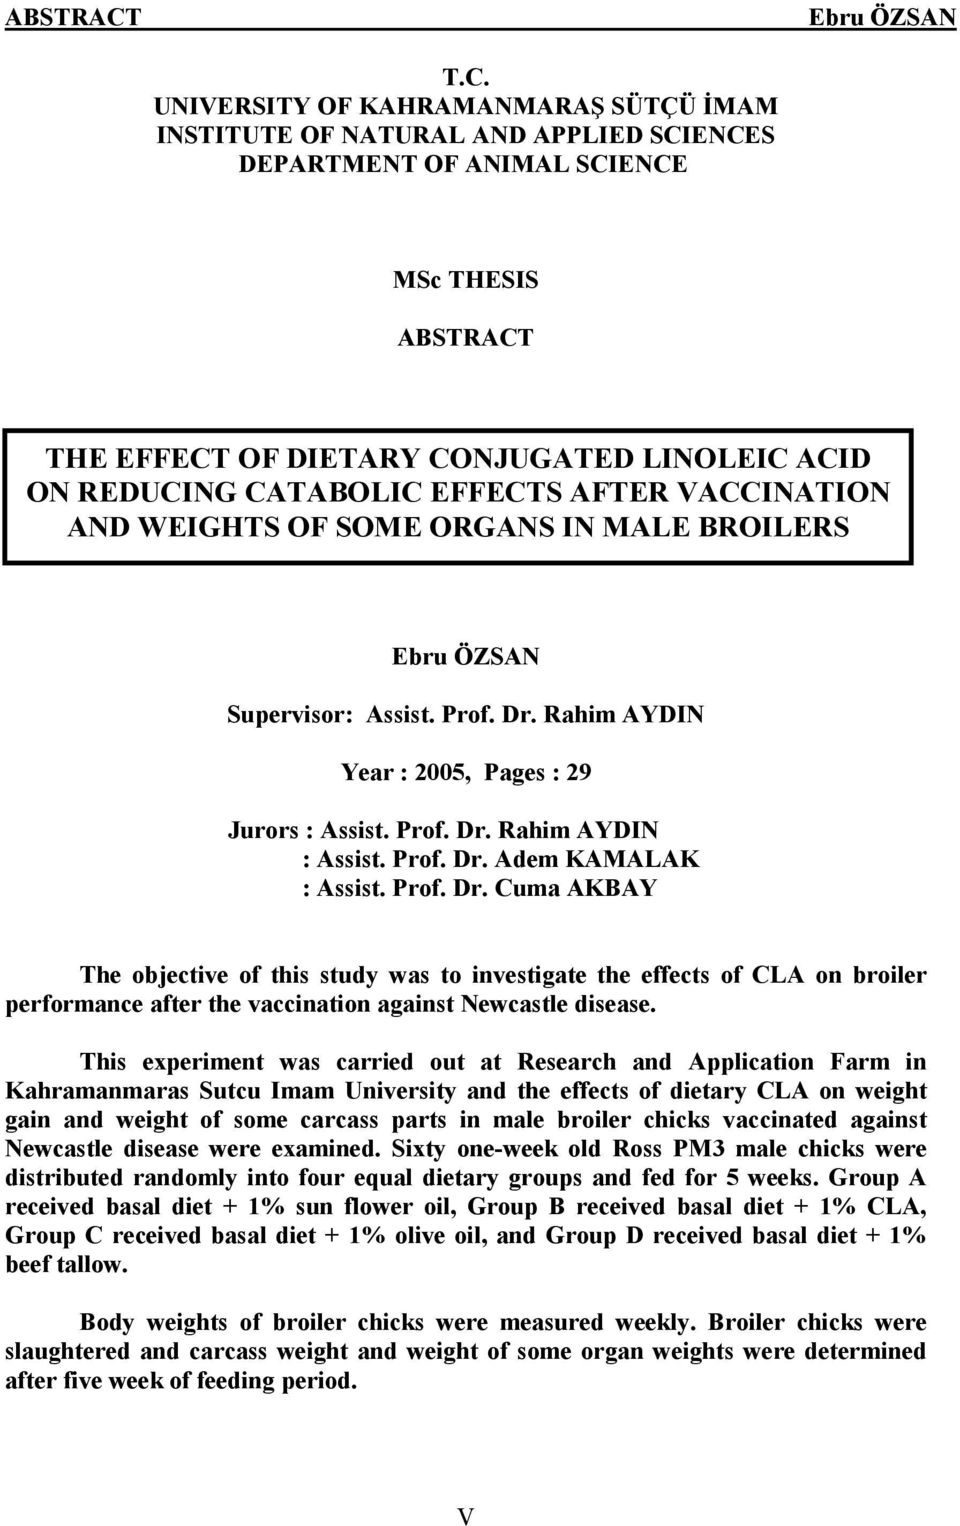 EFFECTS AFTER VACCINATION AND WEIGHTS OF SOME ORGANS IN MALE BROILERS Supervisor: Assist. Prof. Dr. Rahim AYDIN Year : 2005, Pages : 29 Jurors : Assist. Prof. Dr. Rahim AYDIN : Assist. Prof. Dr. Adem KAMALAK : Assist.